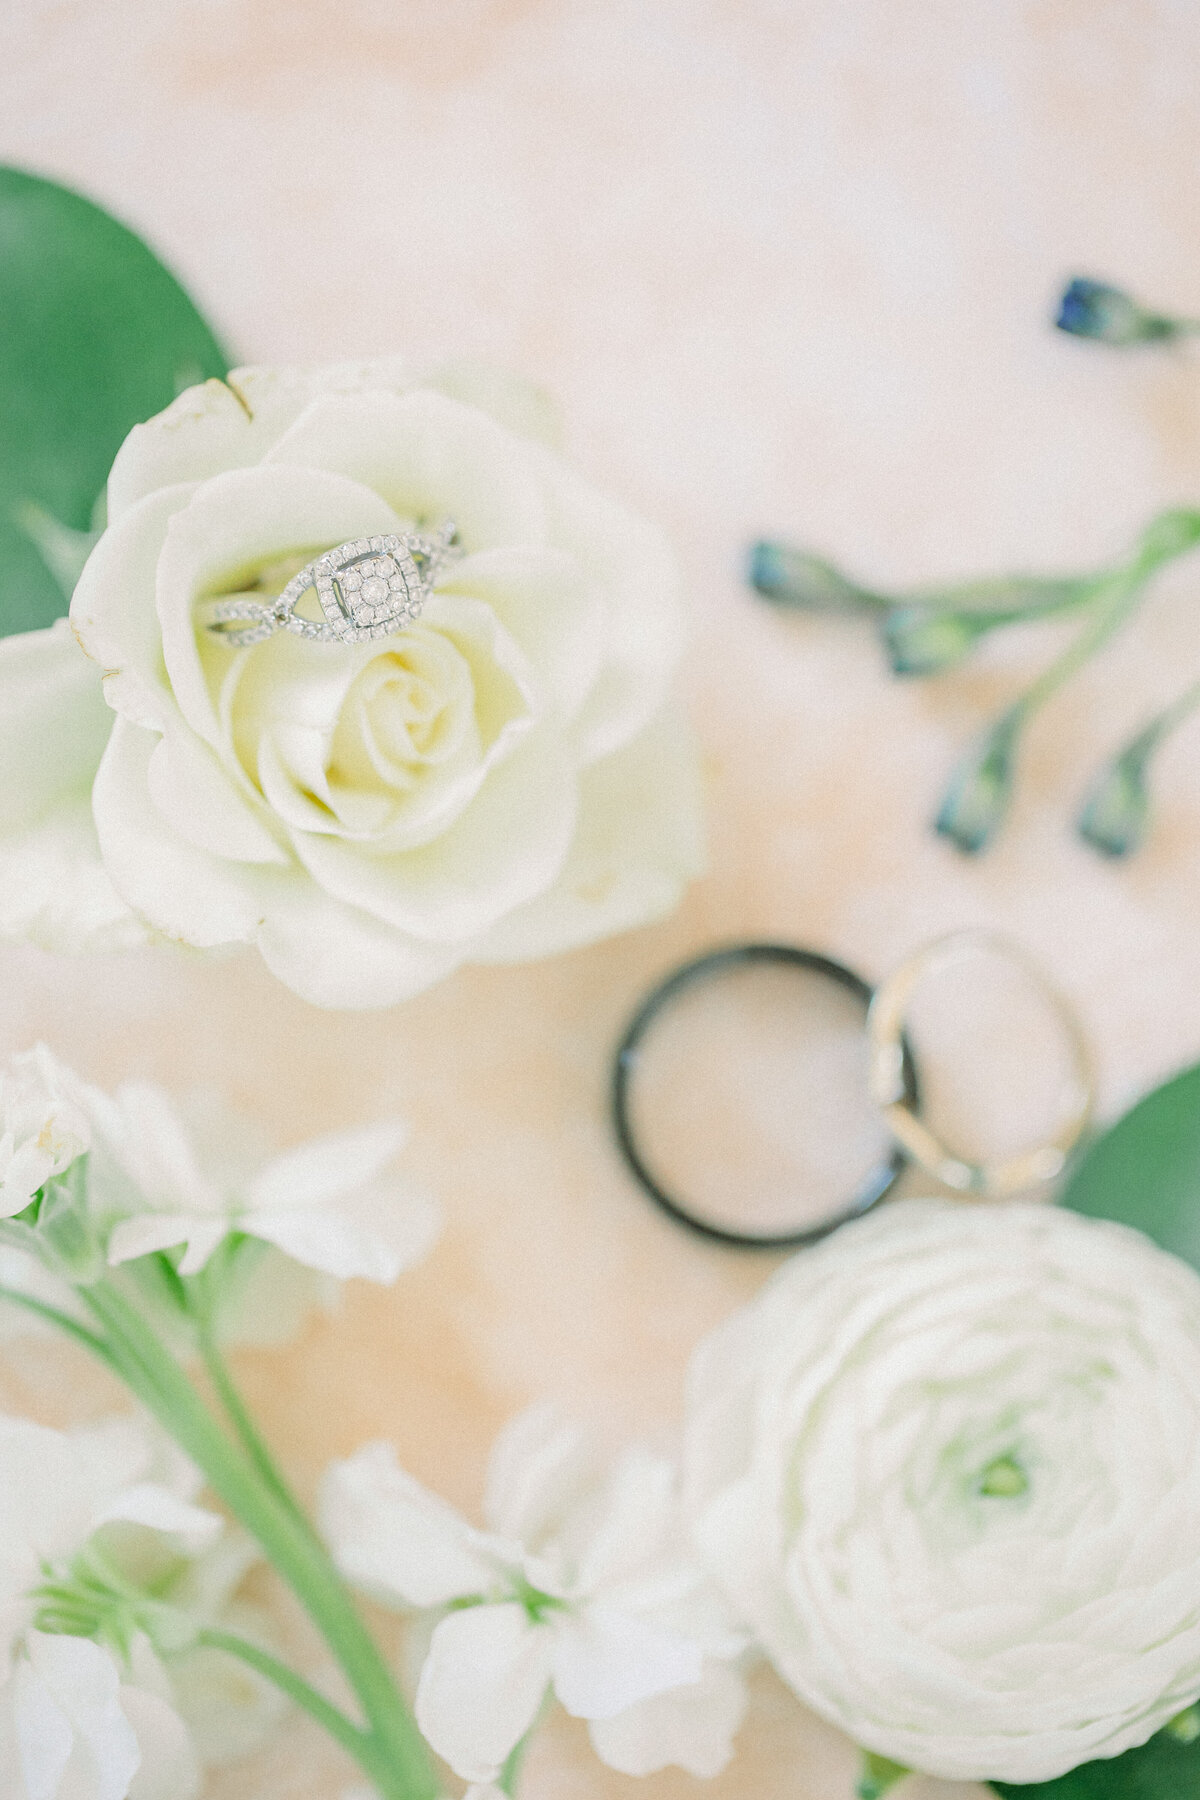 Bride and Groom rings surrounded by beautiful white florals and greenery